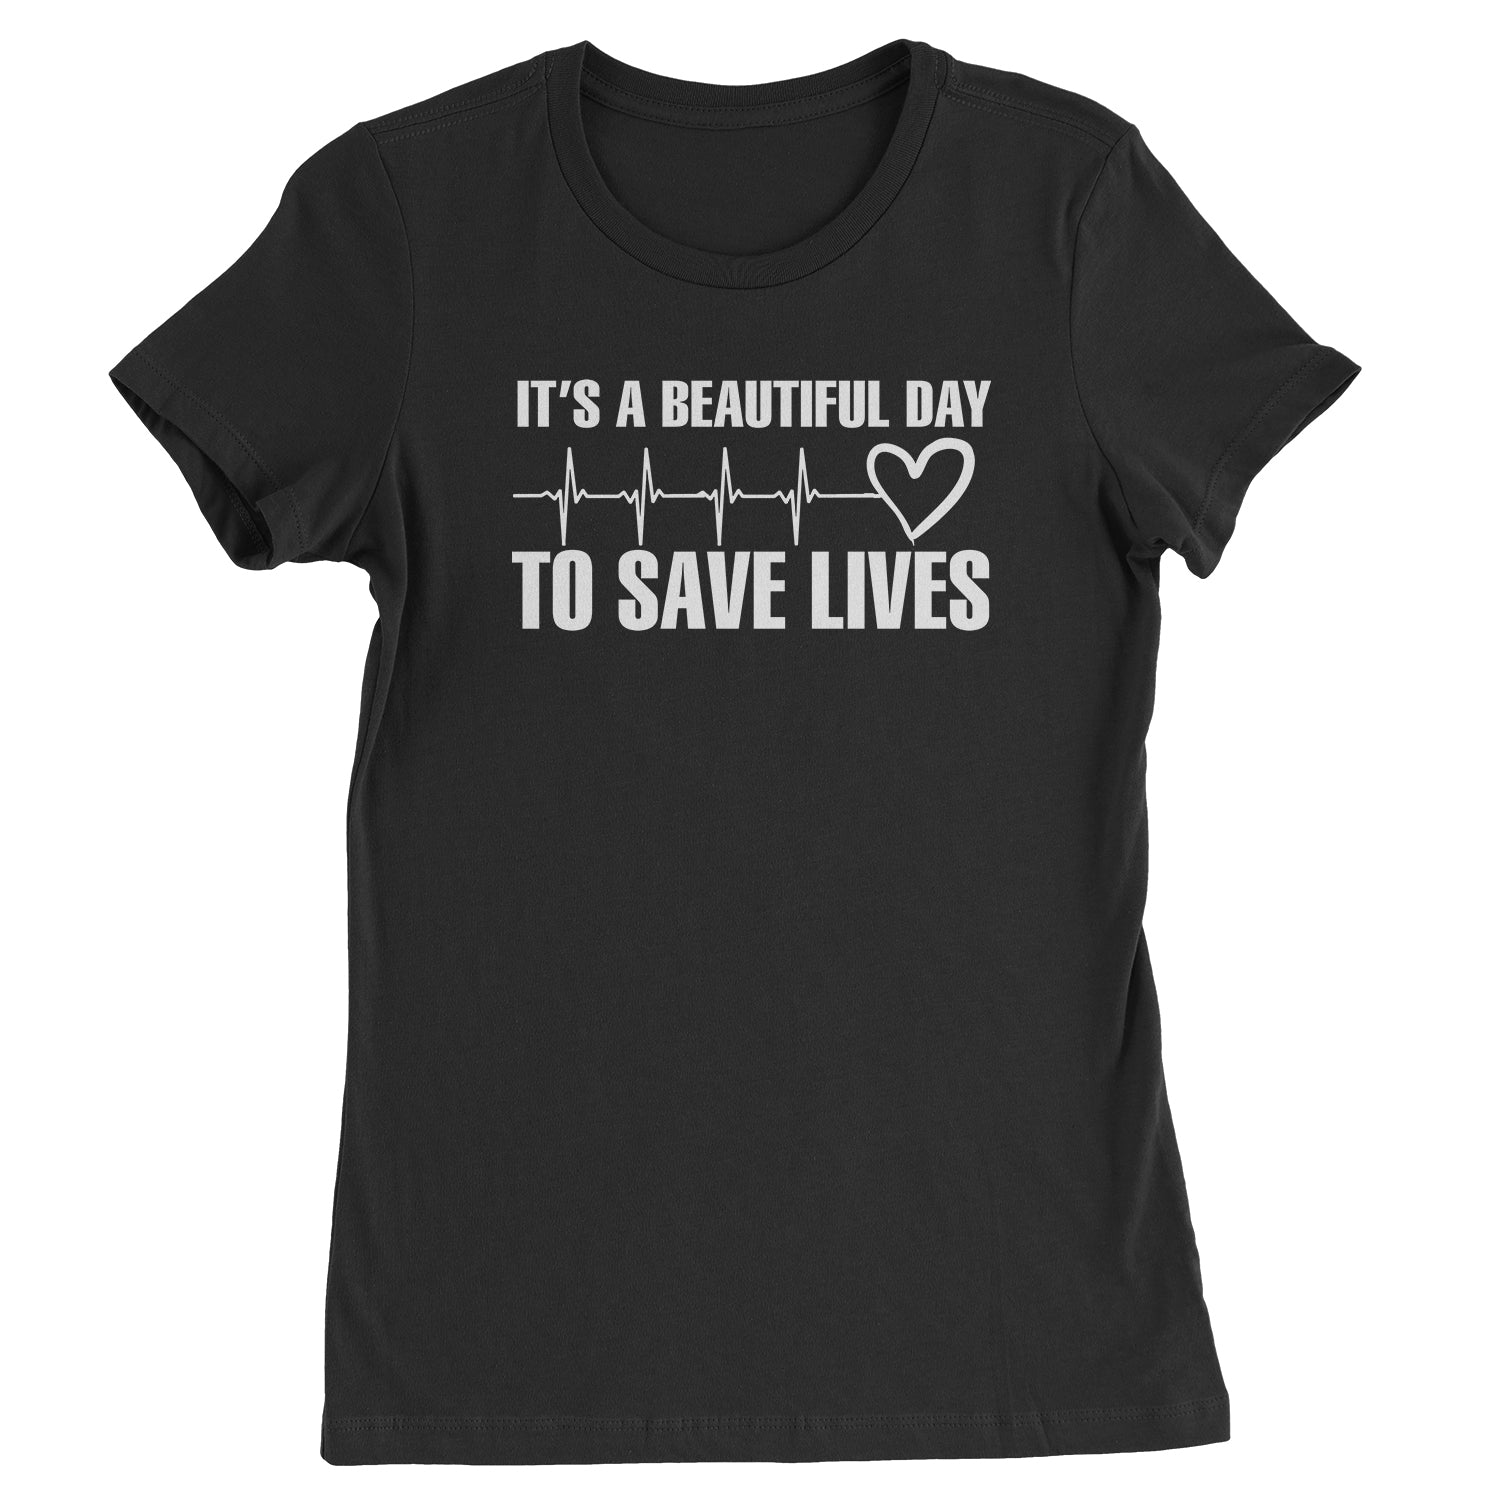 It's A Beautiful Day To Save Lives (White Print) Womens T-shirt #expressiontees by Expression Tees